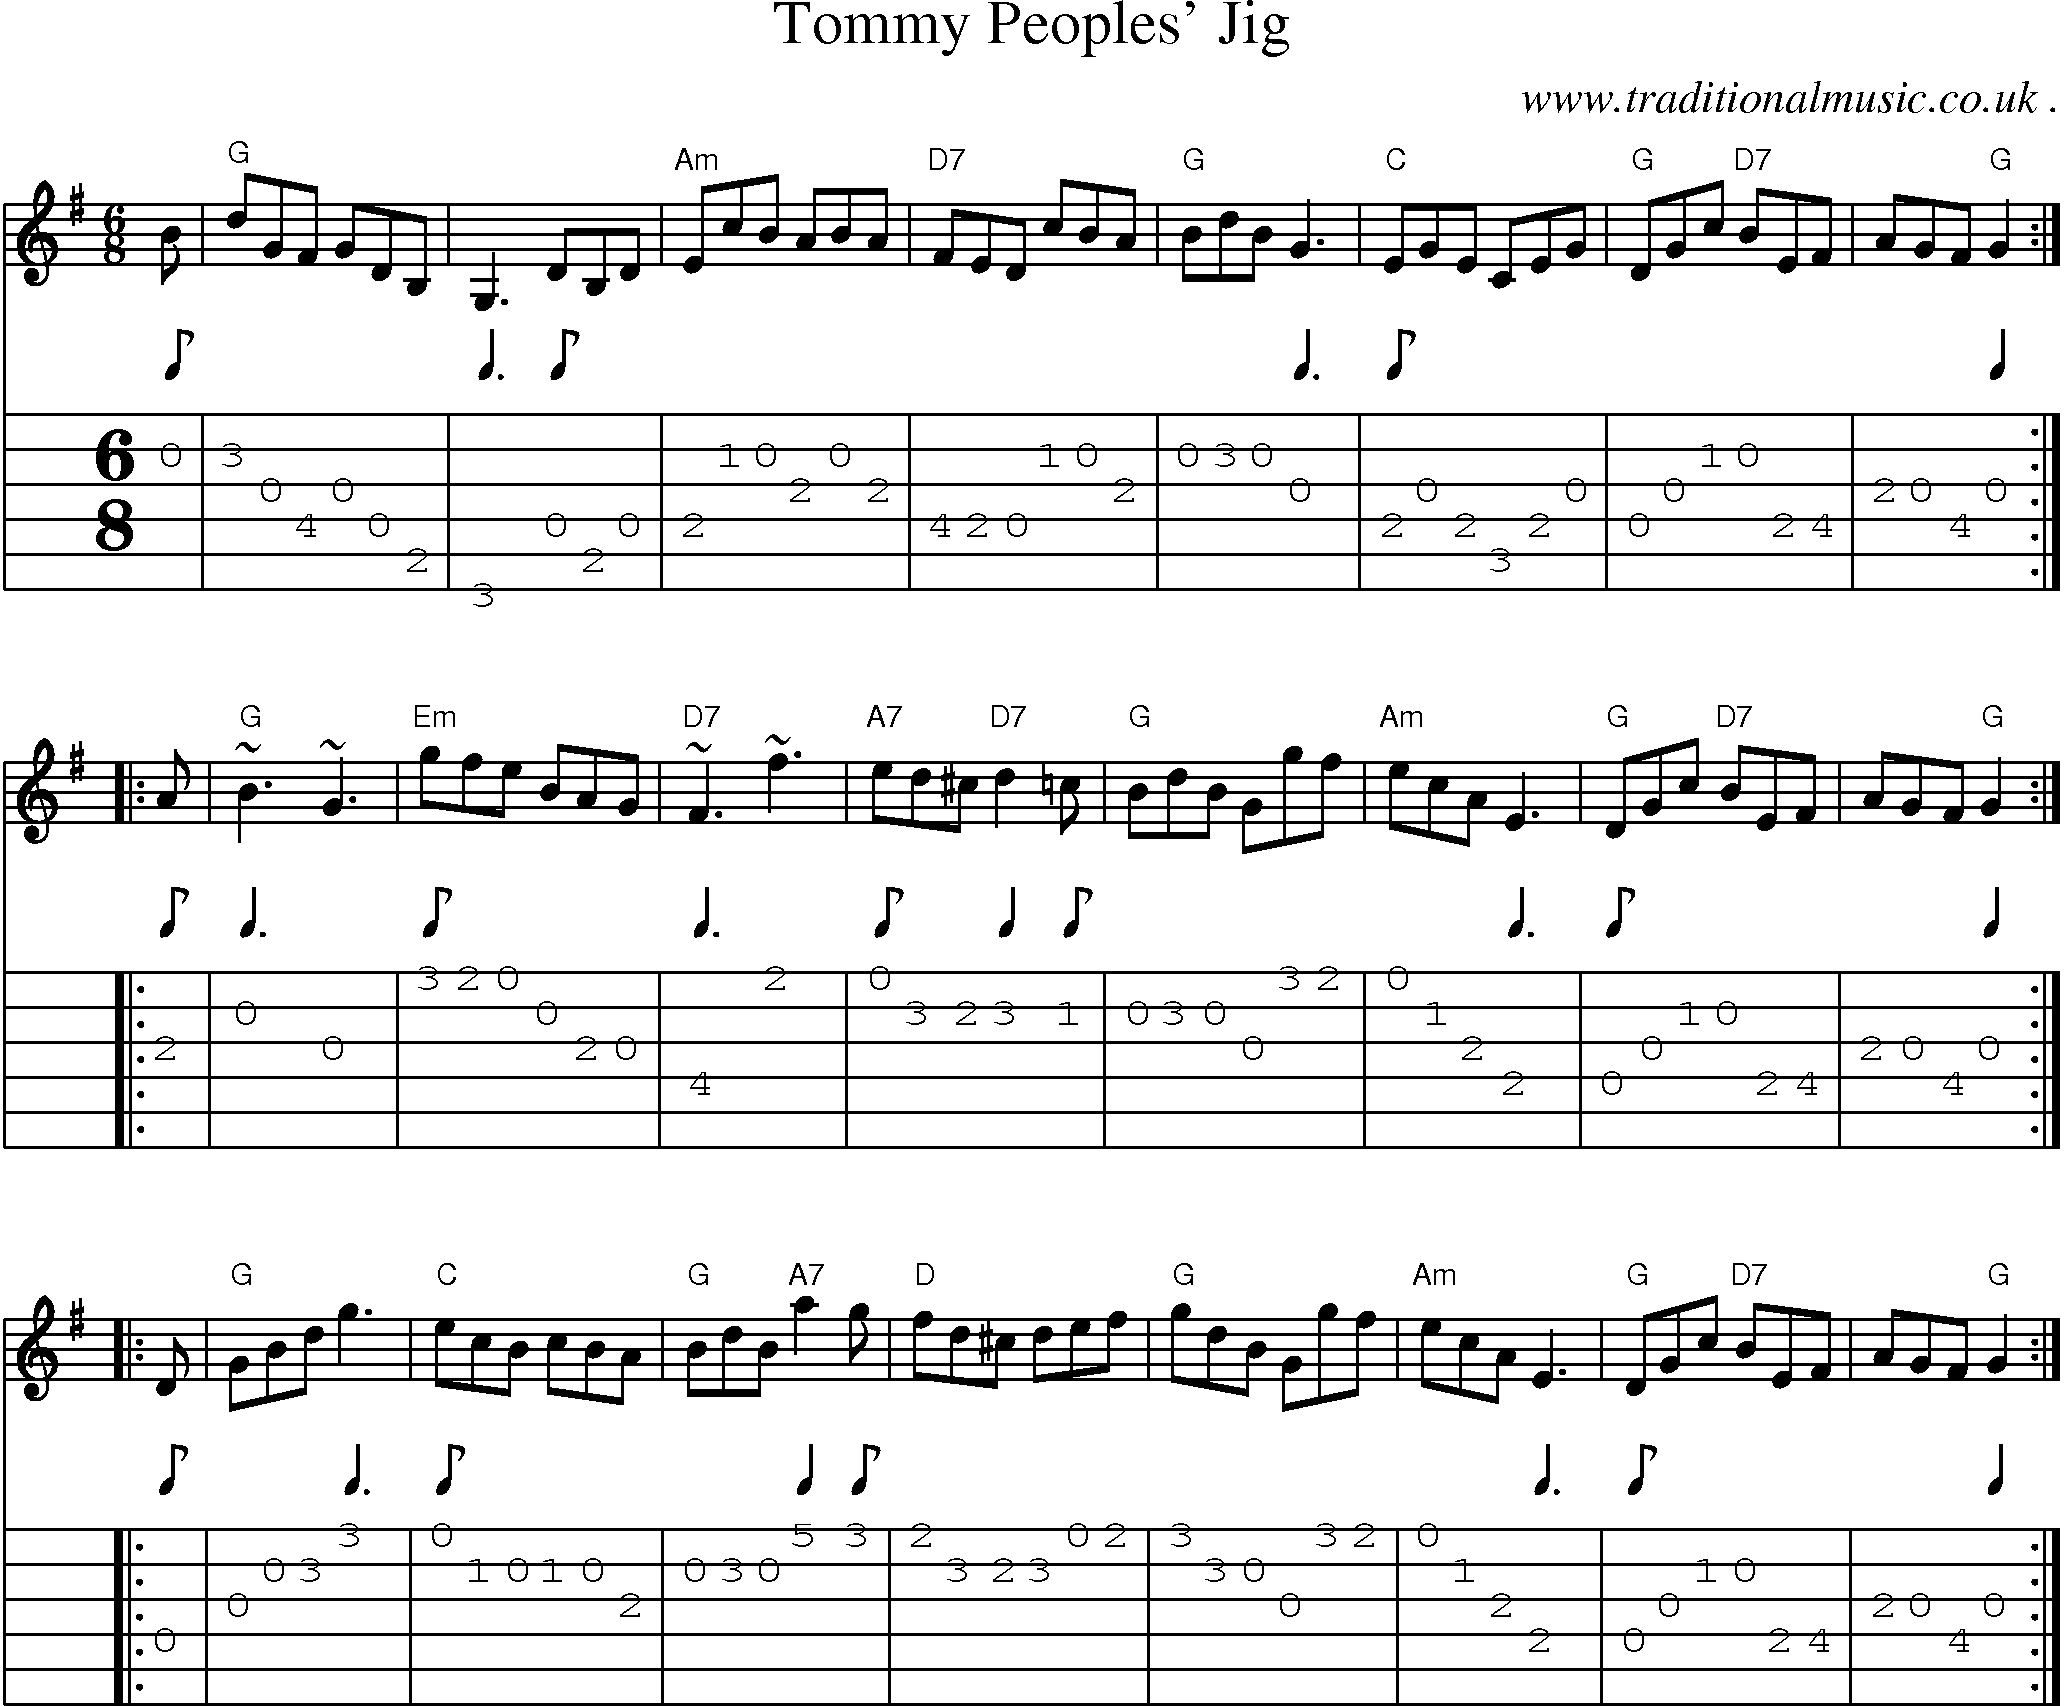 Sheet-music  score, Chords and Guitar Tabs for Tommy Peoples Jig